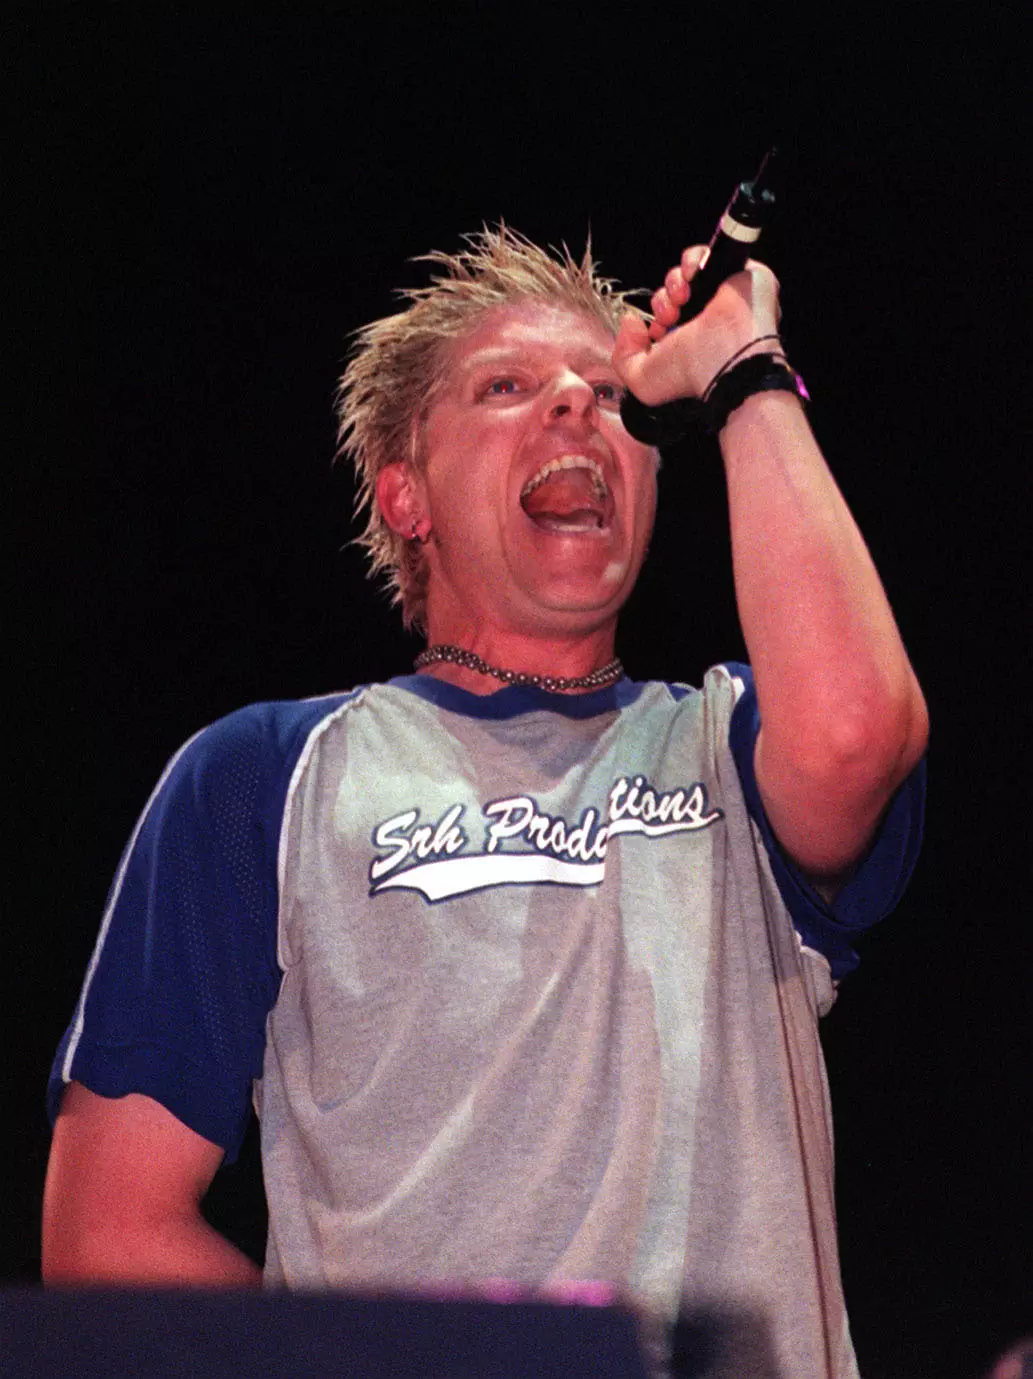 The Offspring front man Dexter Holland performing at Reading music festival.